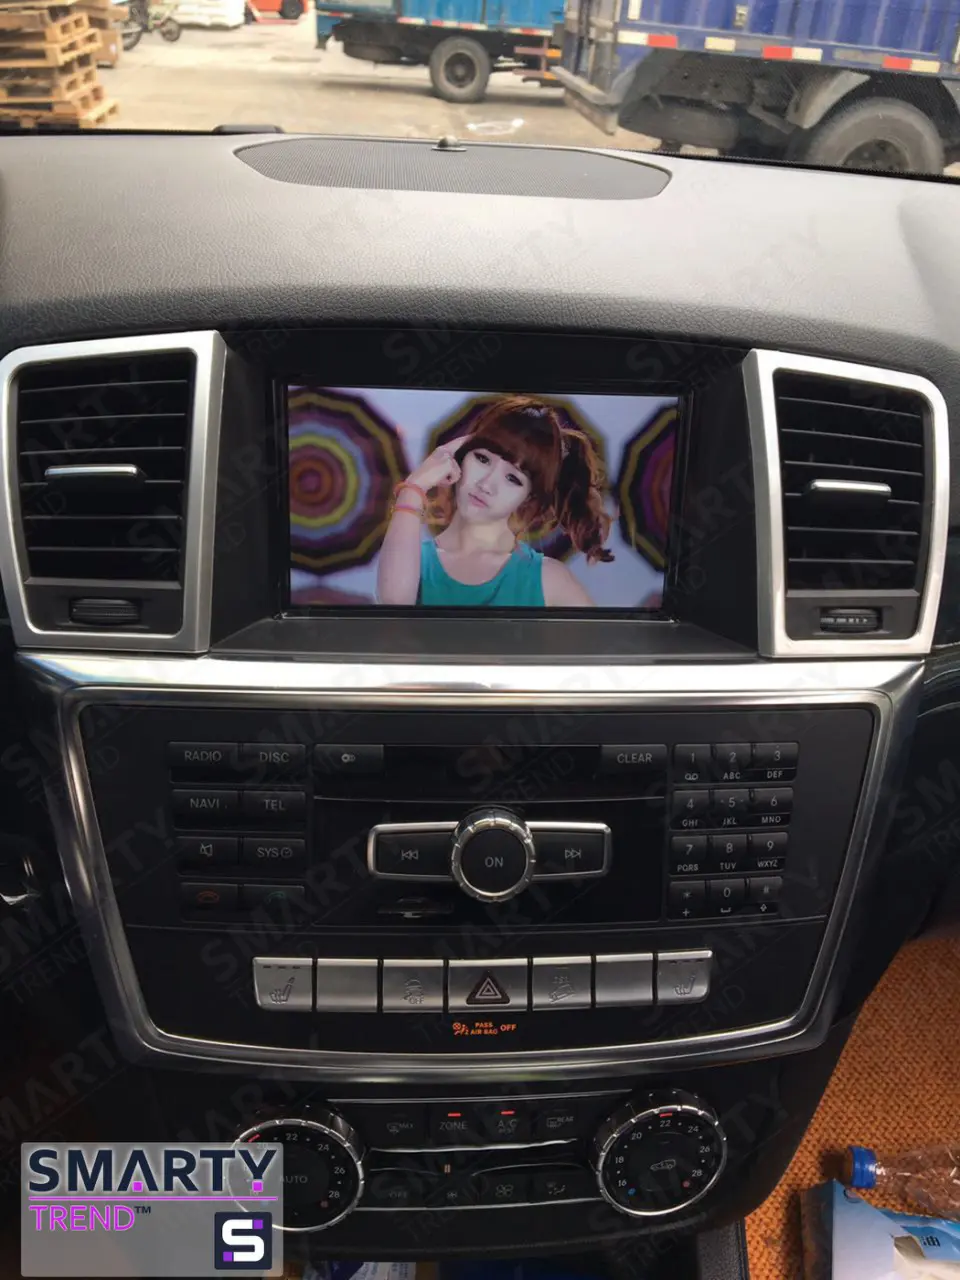 SMARTY Trend head unit for Mercedes Benz GL-Class.